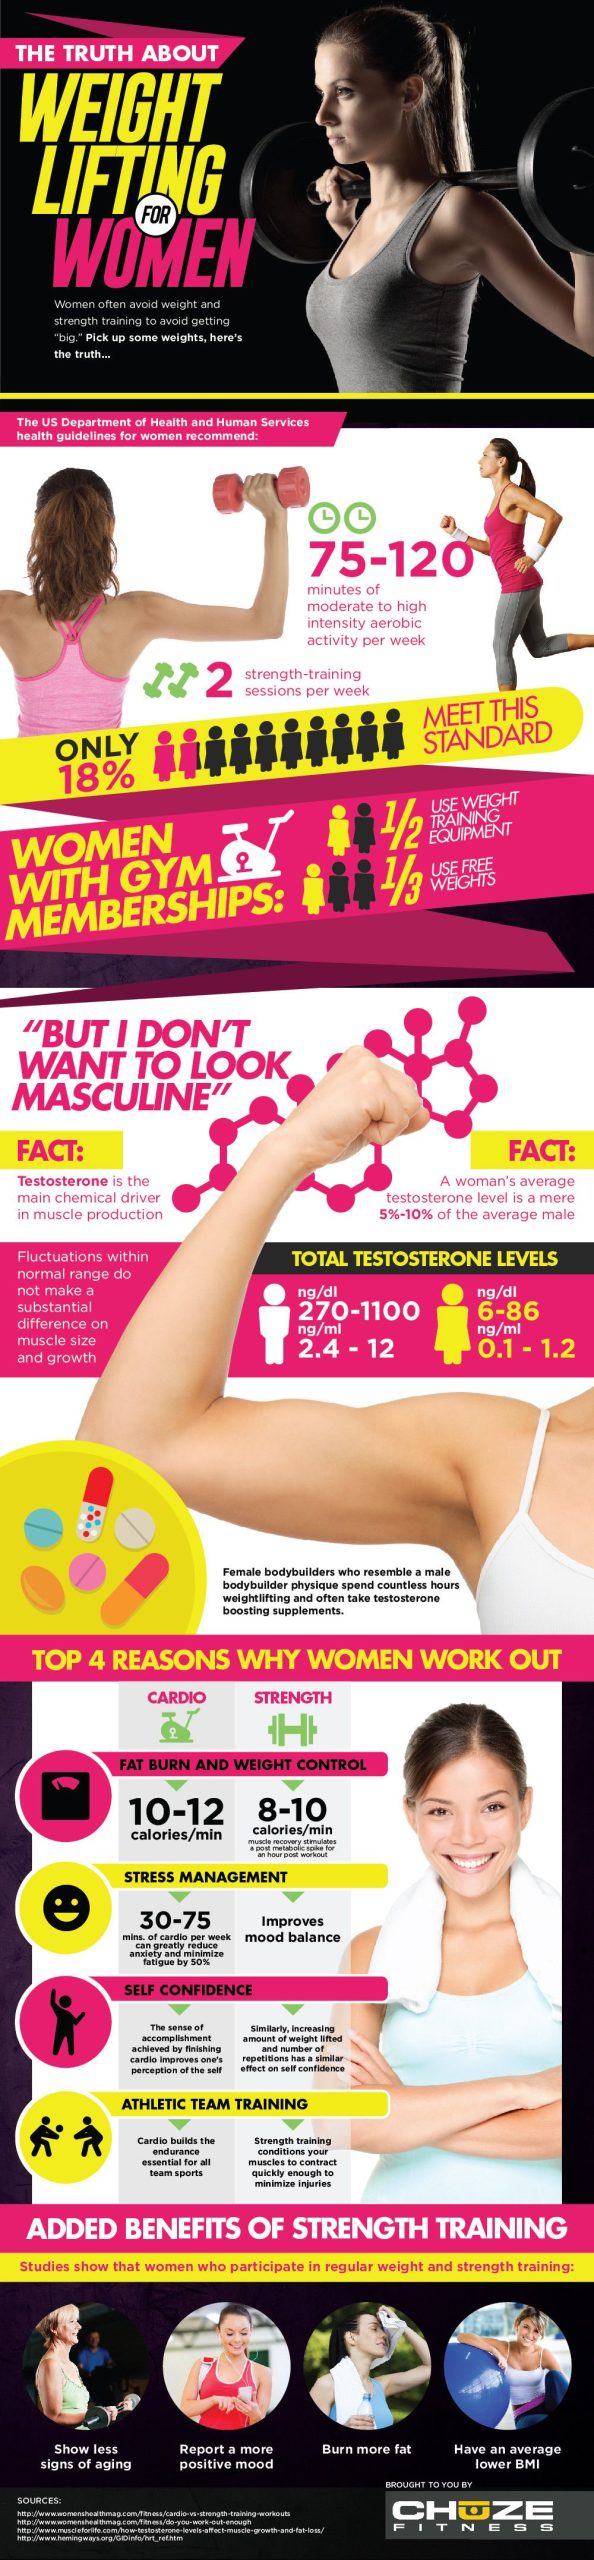 The Truth About Women's Weightlifting [Infographic]